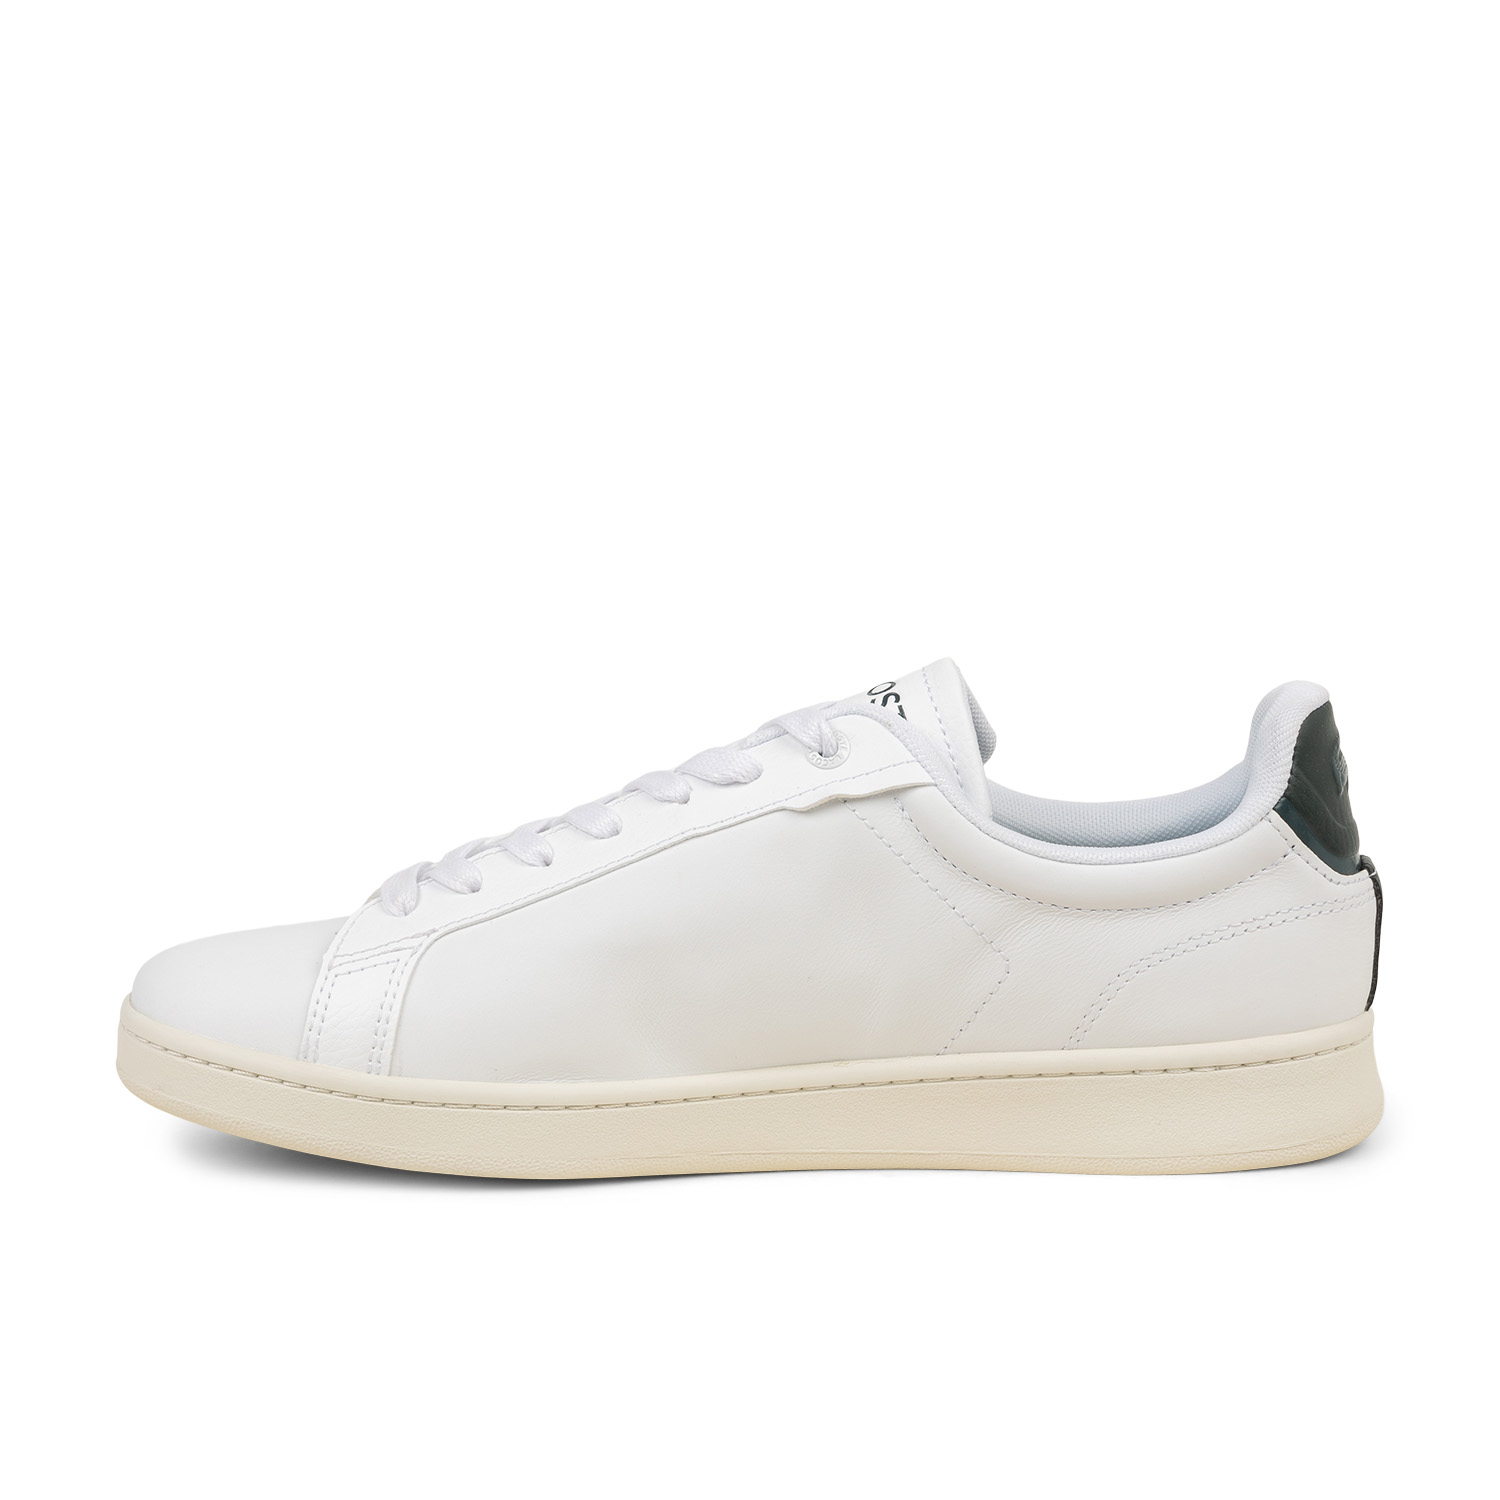 04 - CARNABY - LACOSTE -  - Cuir